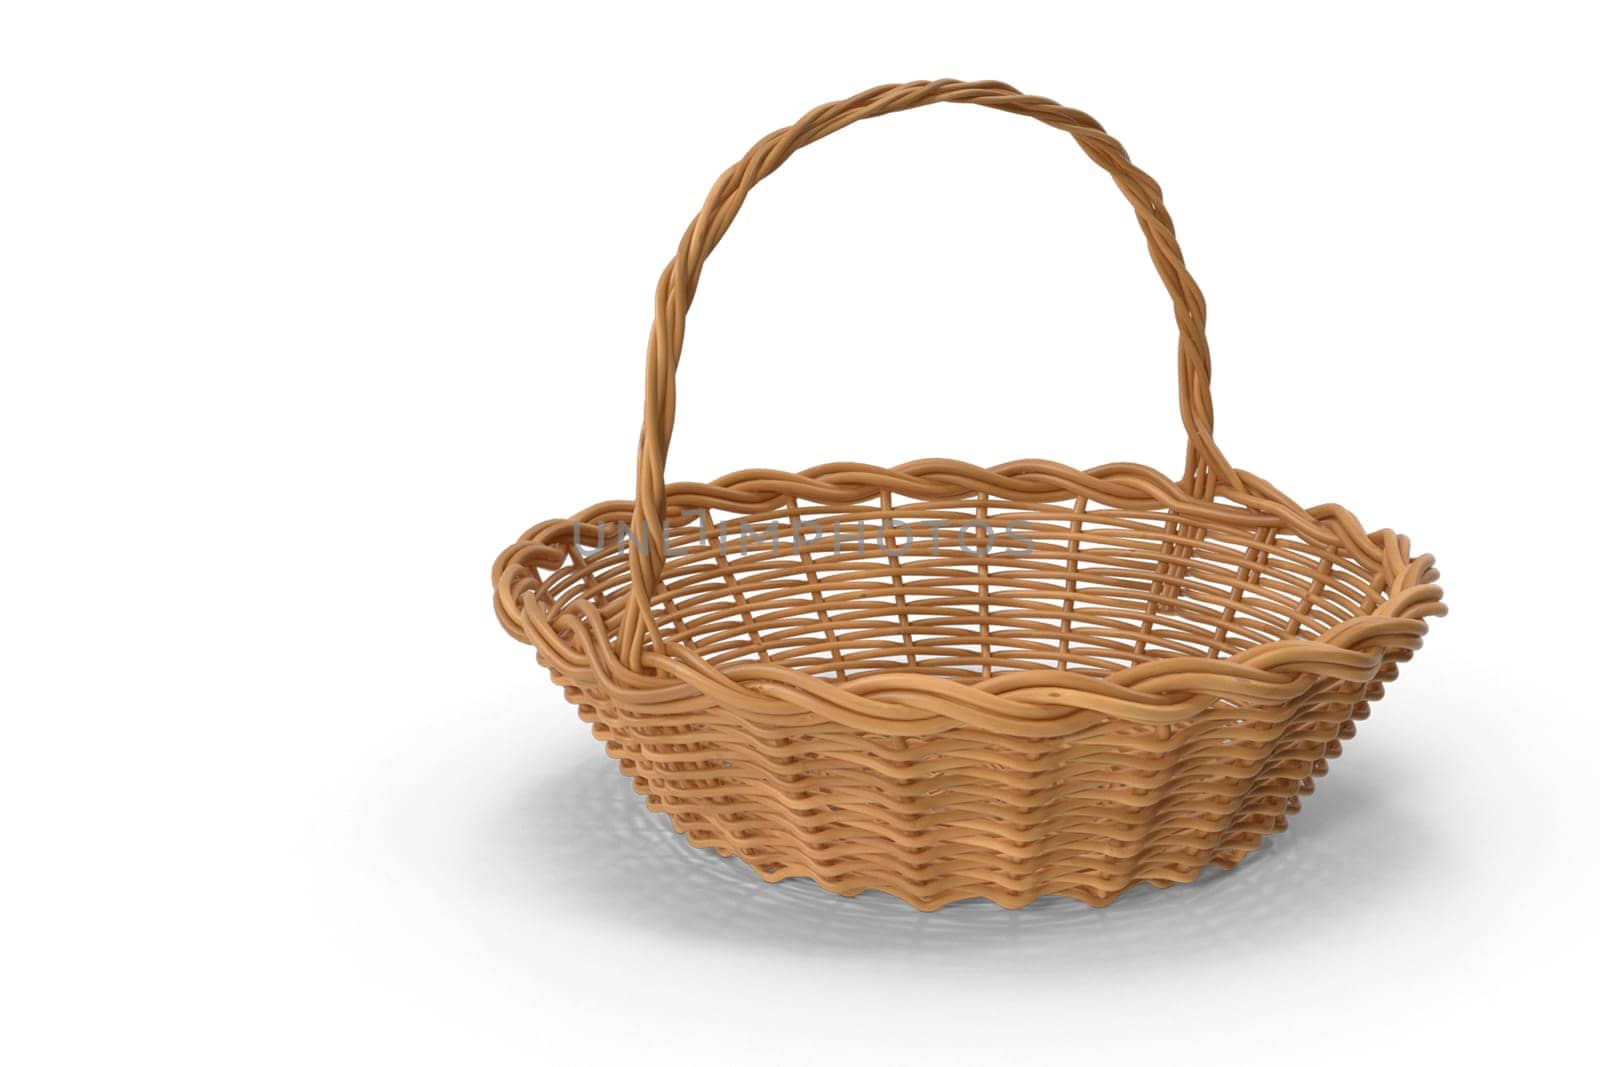 Comfortable wicker basket on a white background. by georgina198